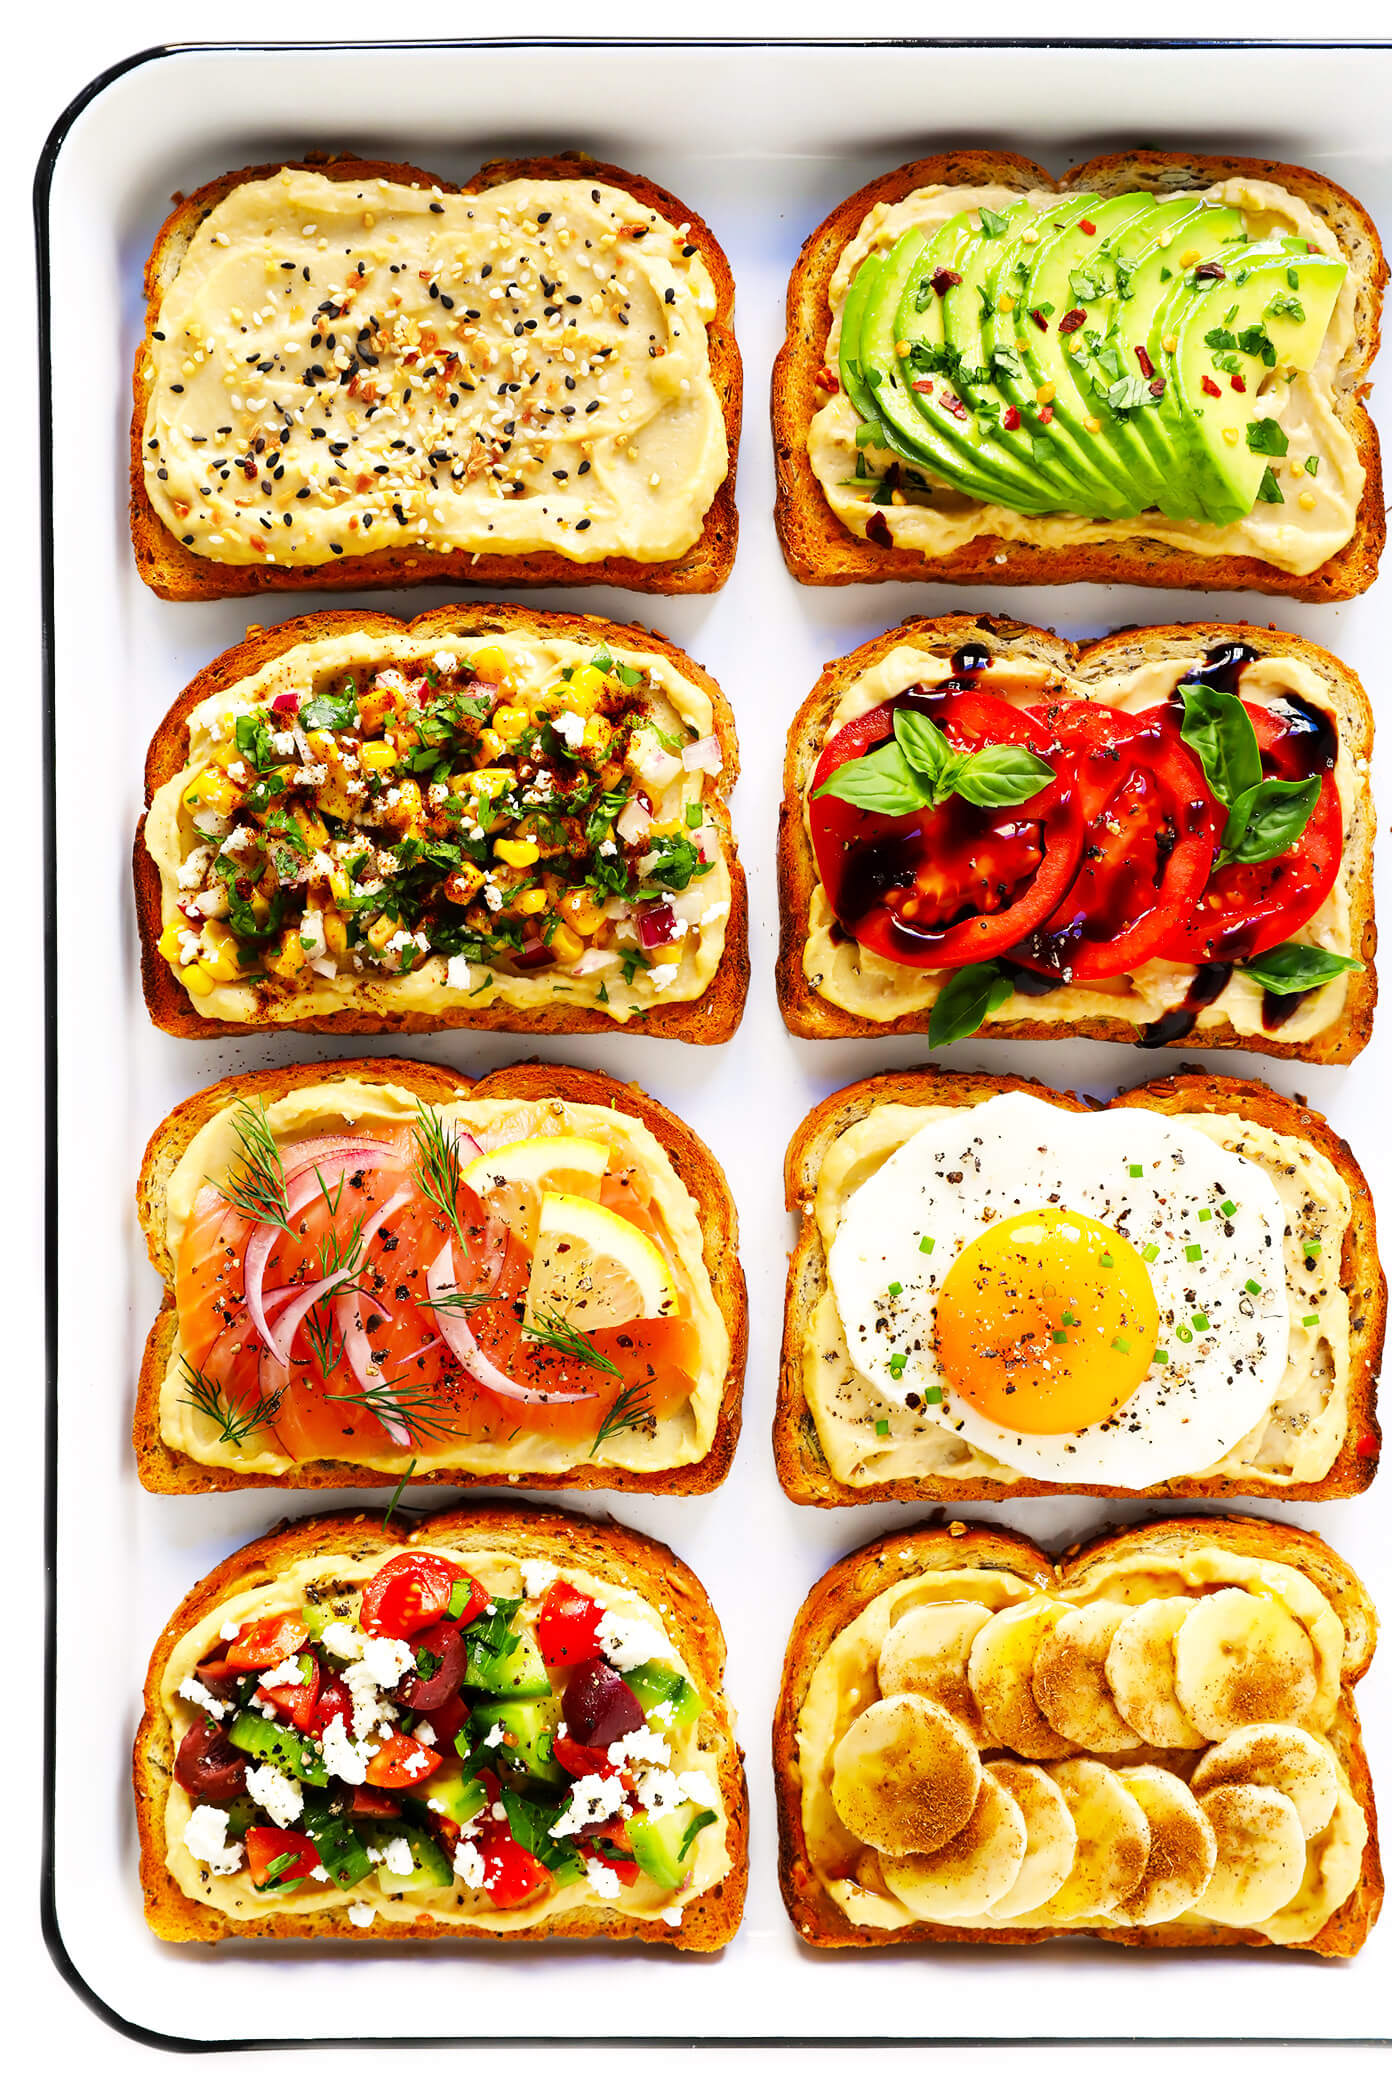 All types of hummus on toast variations on a white table